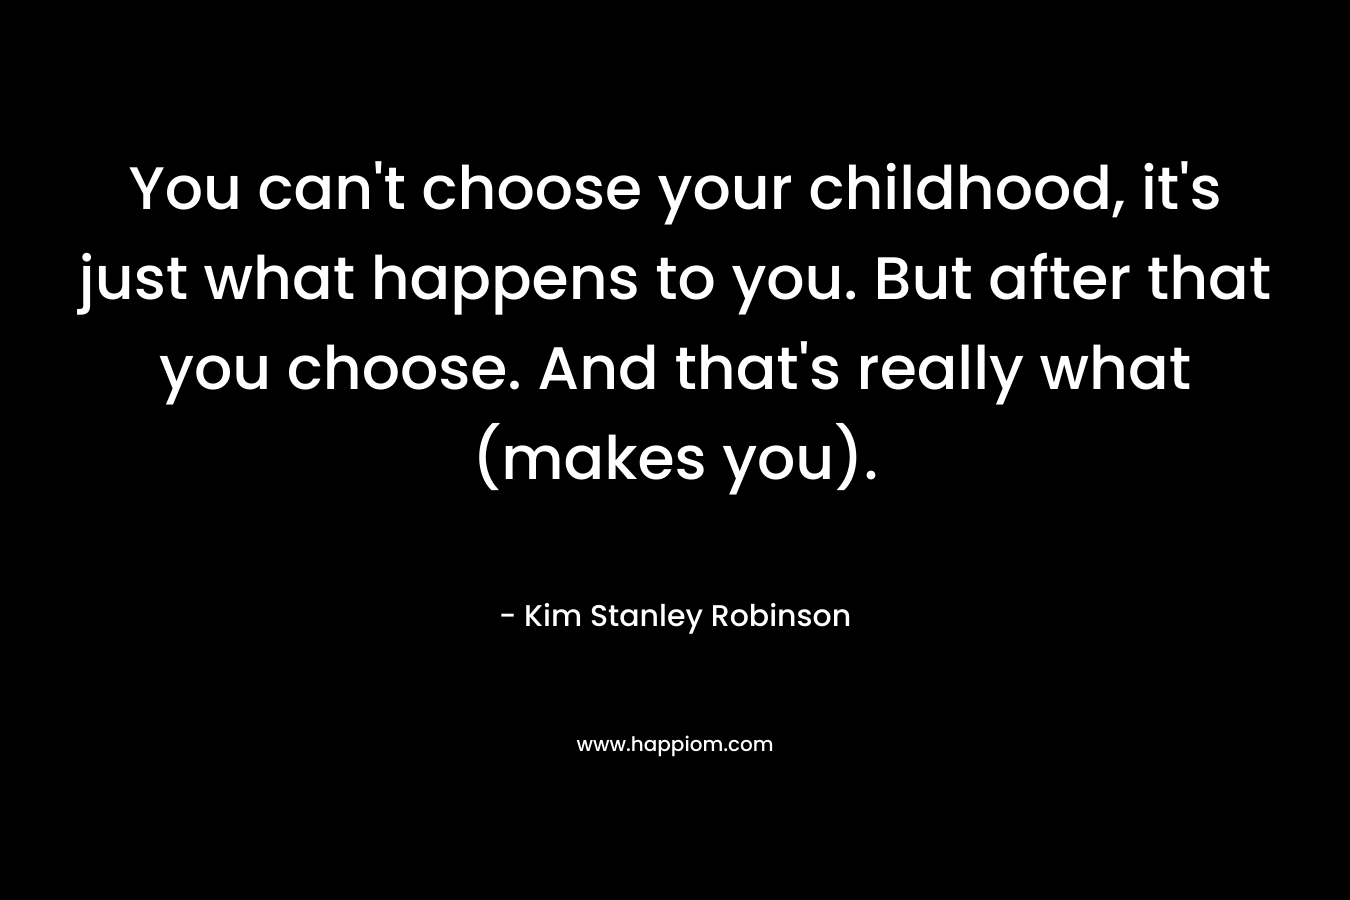 You can't choose your childhood, it's just what happens to you. But after that you choose. And that's really what (makes you).